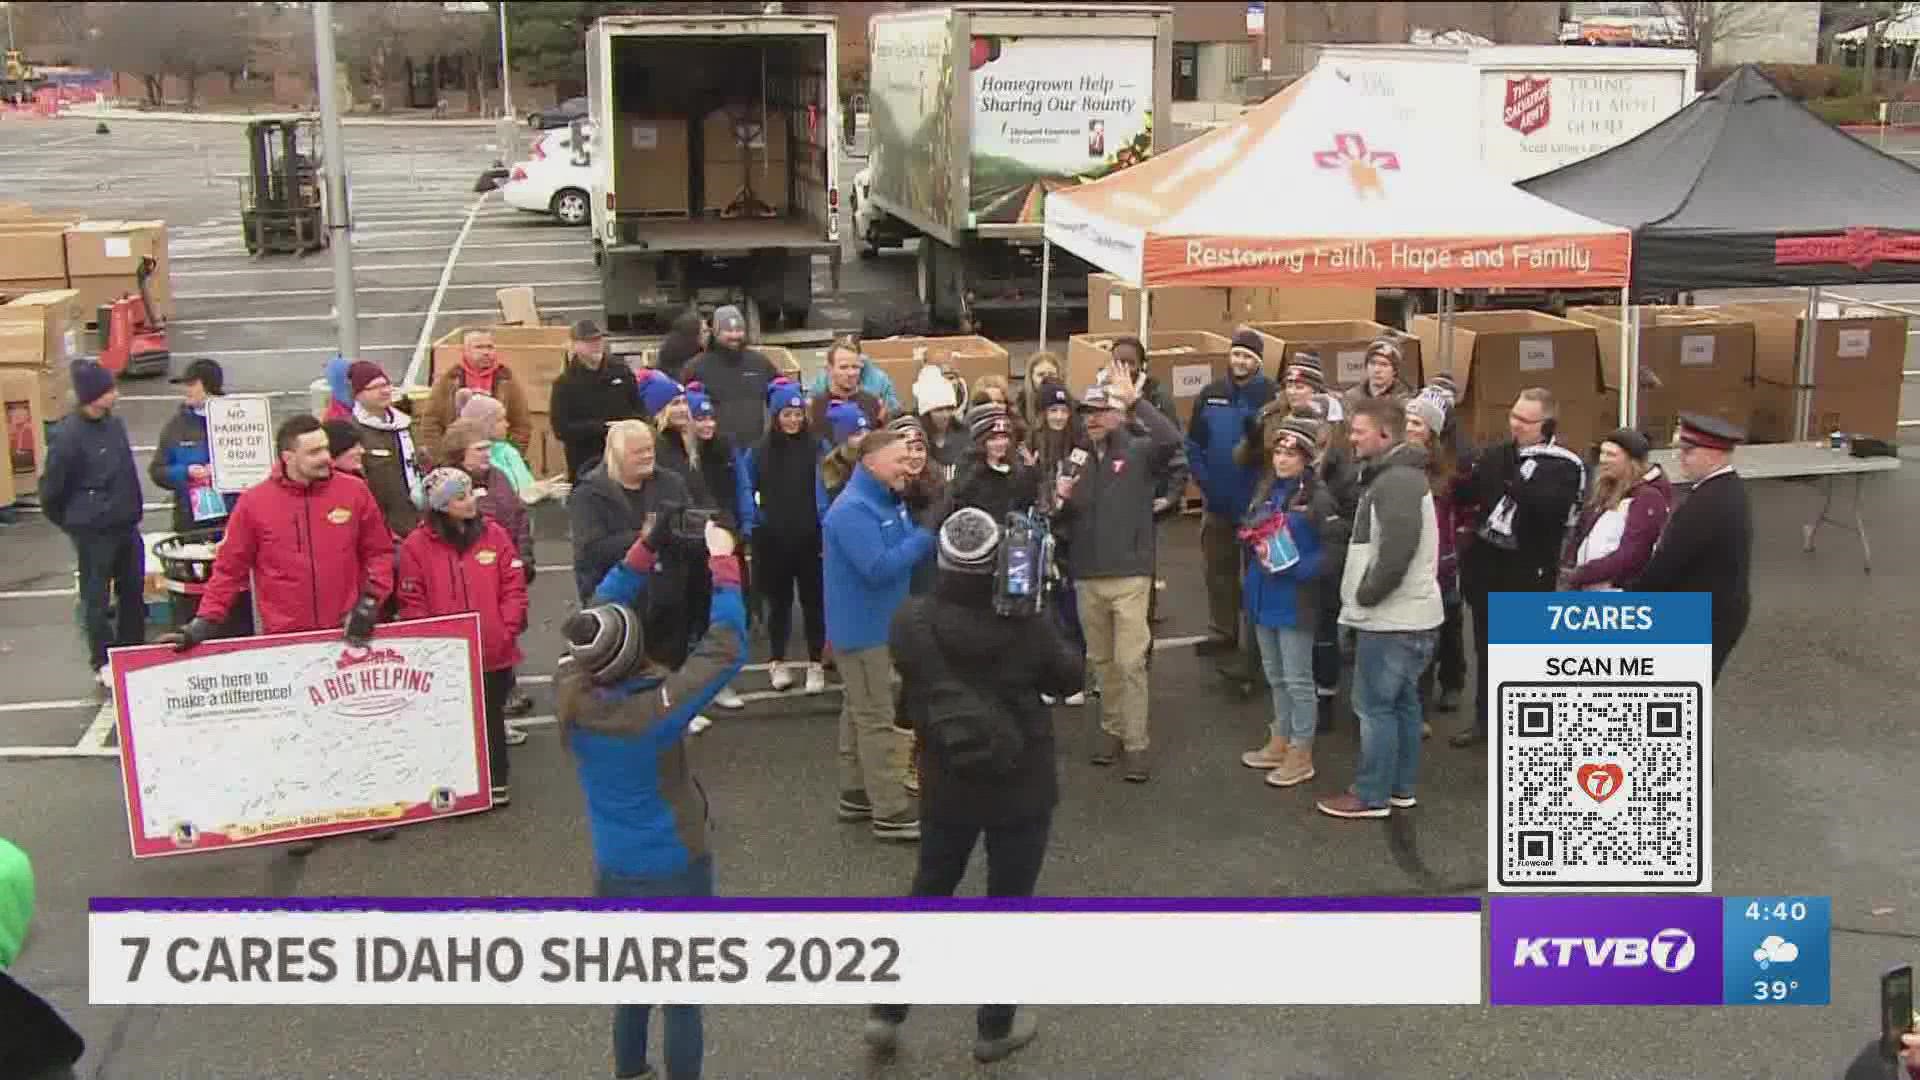 KTVB had a huge turnout for 7 Cares Idaho Shares.